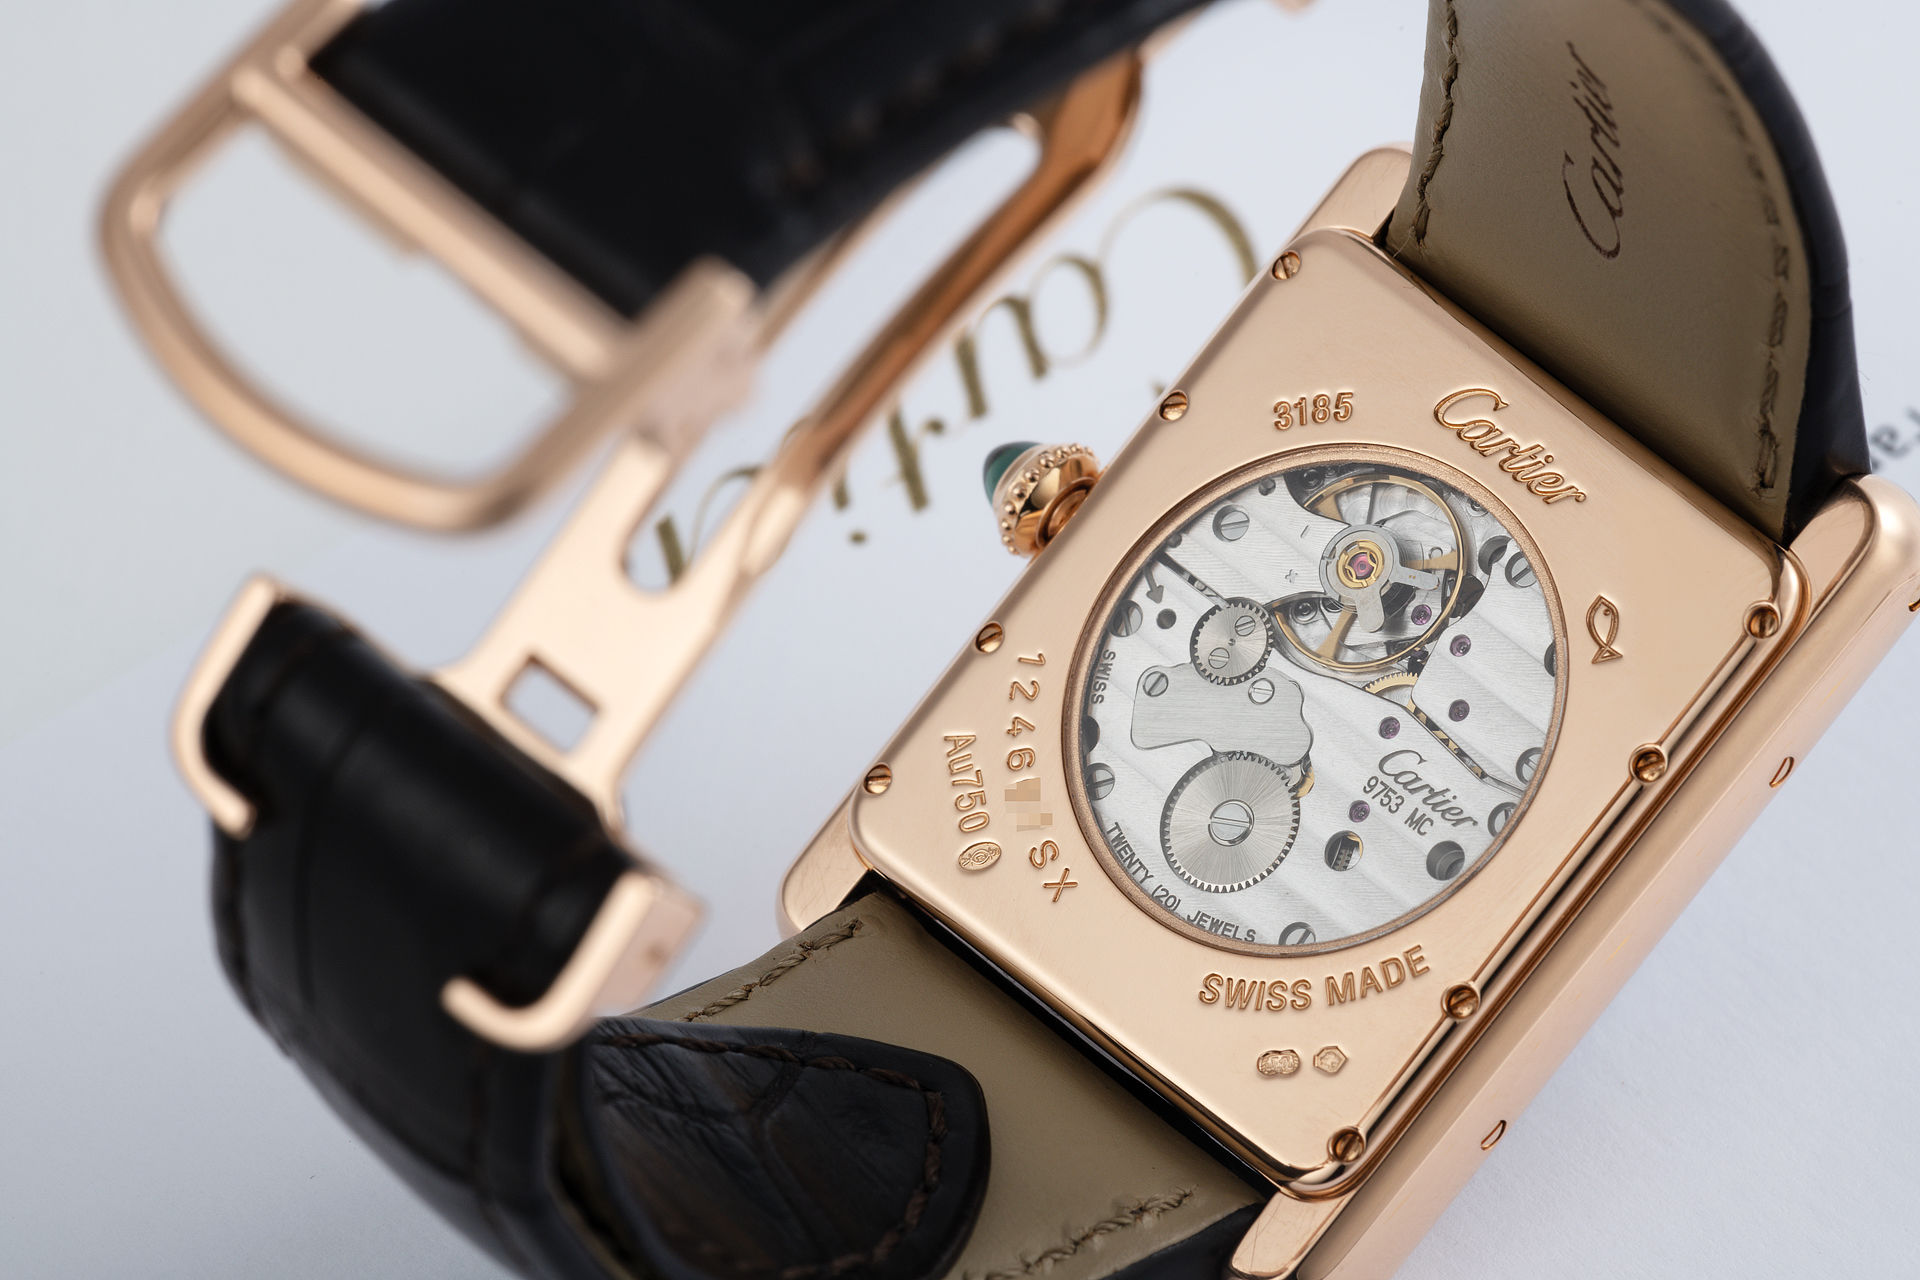 18ct Rose Gold 'Power Reserve' | ref W1560003 | Cartier Tank Louis